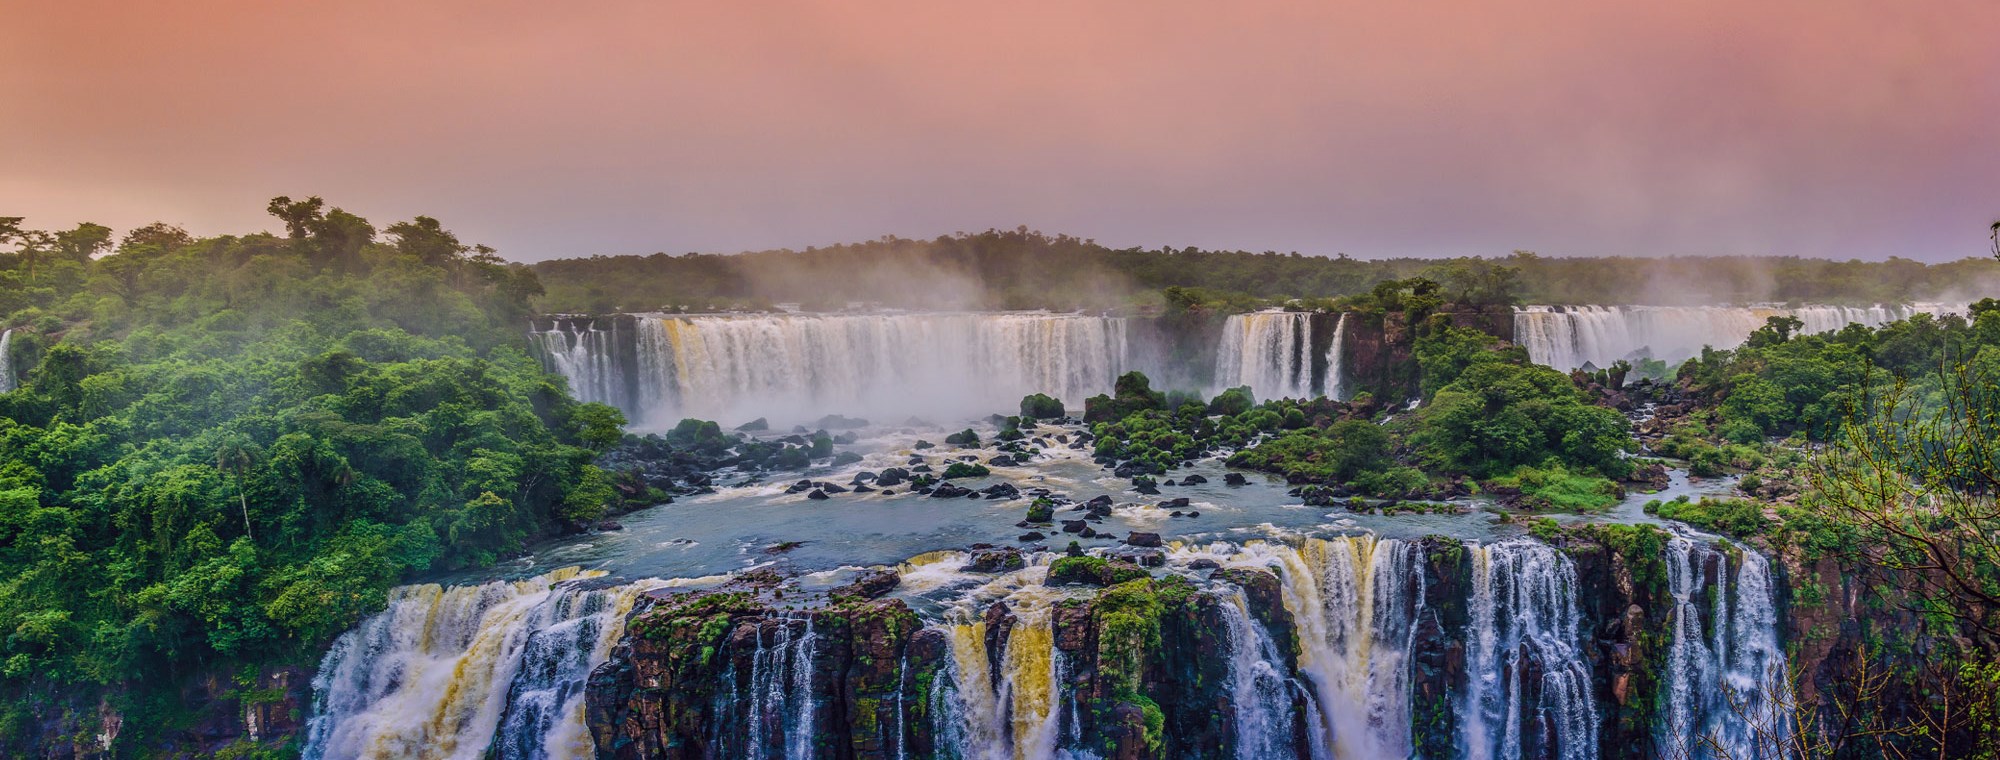 Check out our Central and South America tours to see Iguazu Falls at sunset